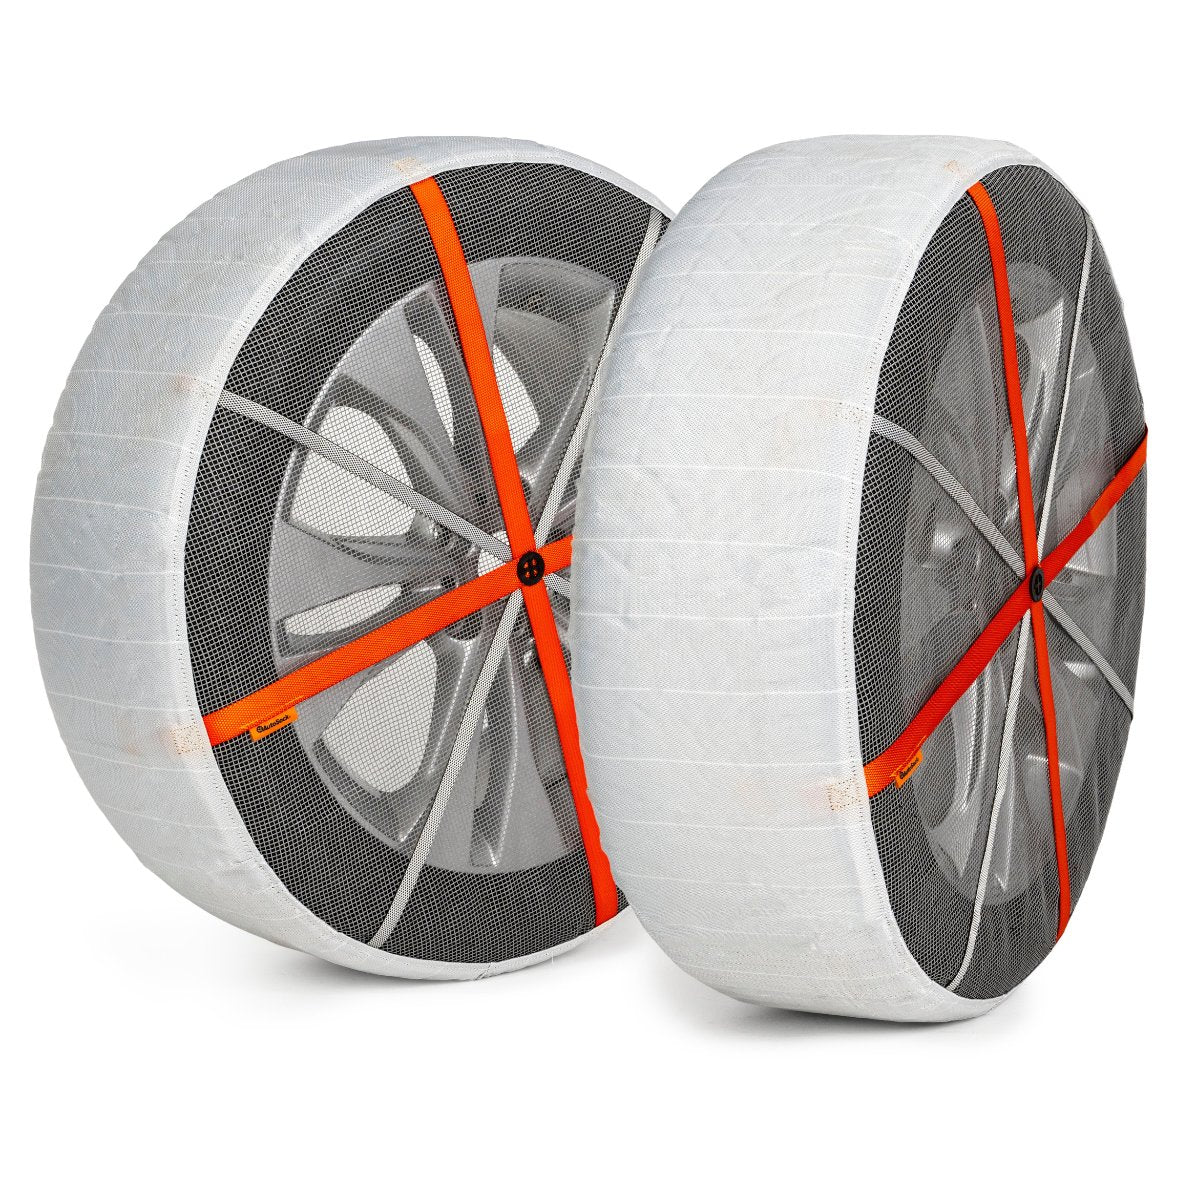 Pair of AutoSock textile snow chains installed on two wheels in front of white background showing product frontside AL74 AL 74